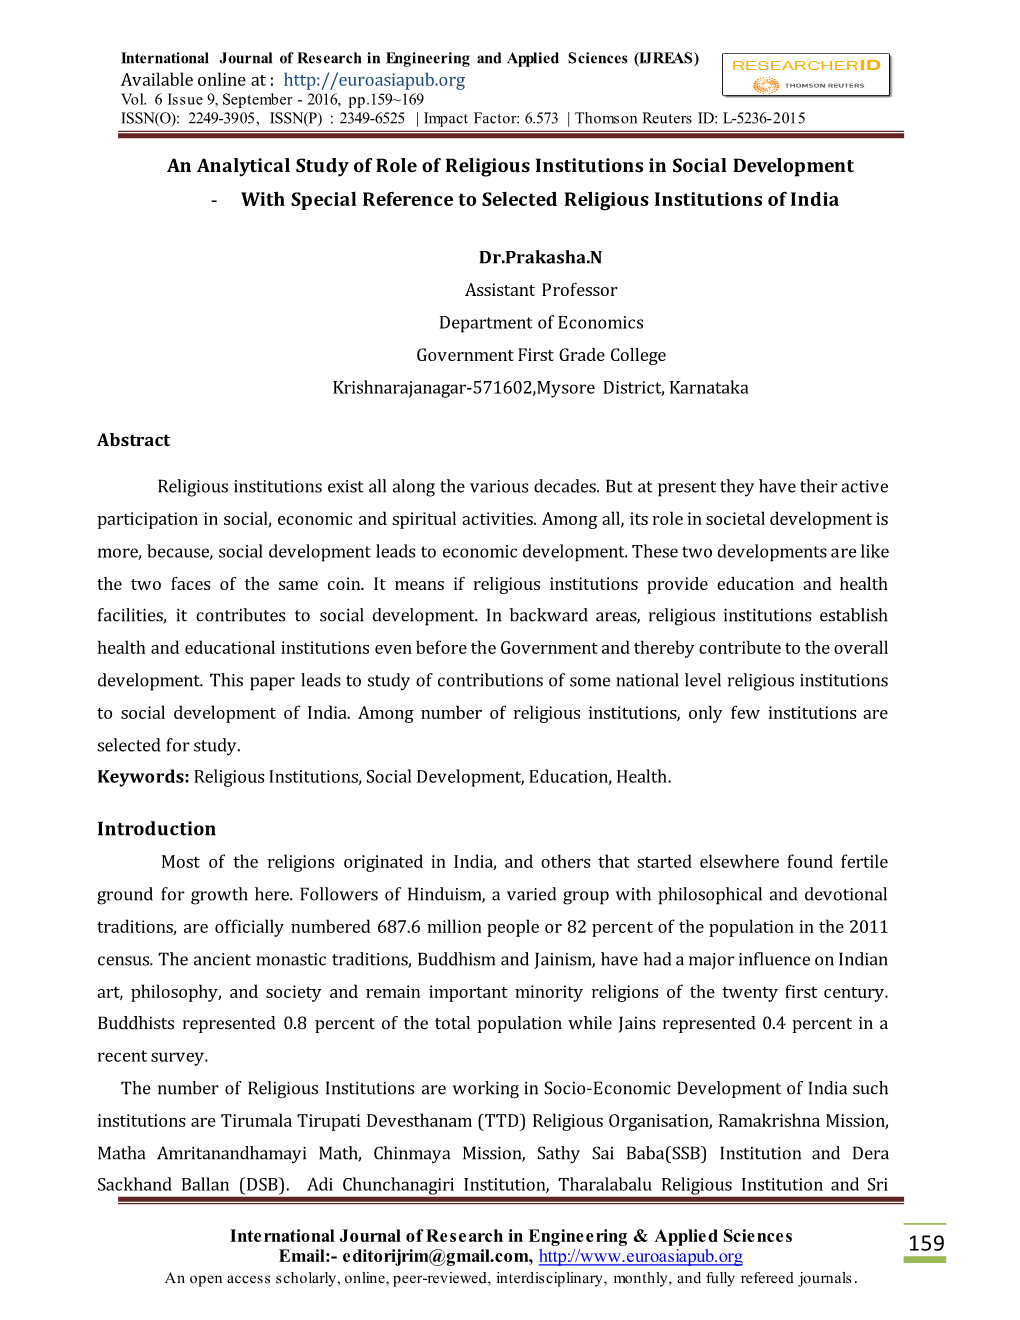 An Analytical Study of Role of Religious Institutions in Social Development - with Special Reference to Selected Religious Institutions of India